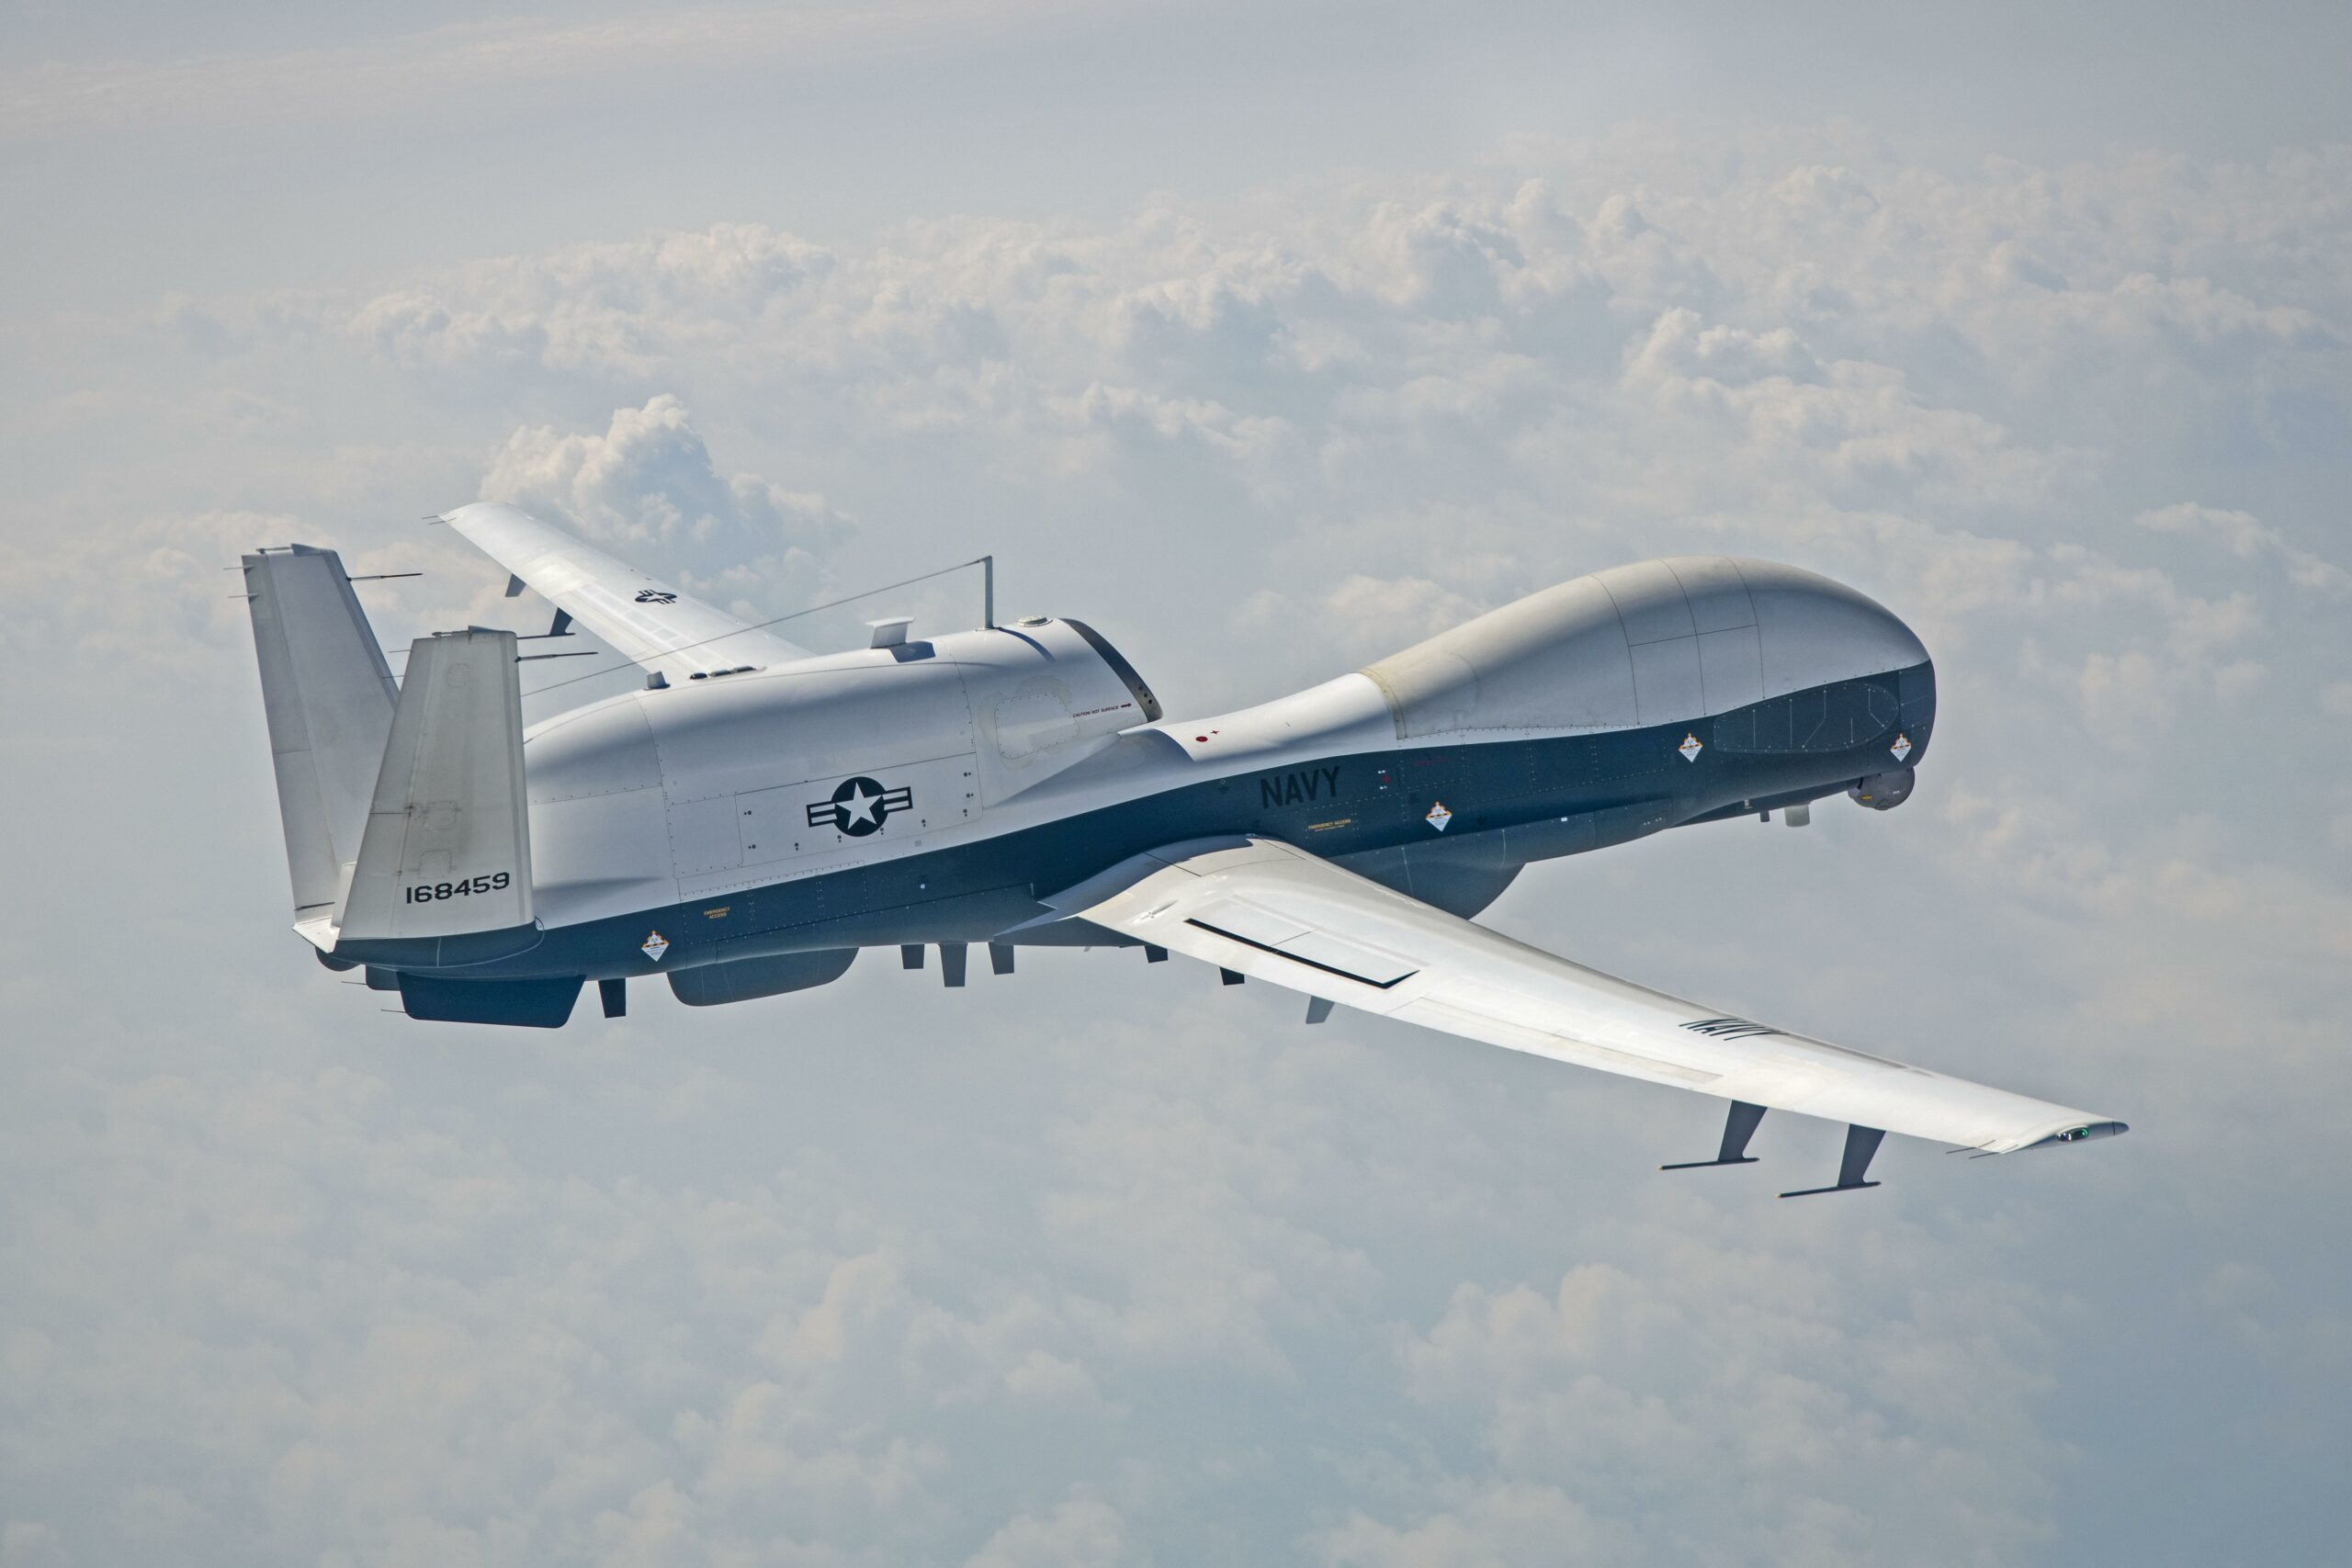 An MQ-4C Triton flew its first test flight in its new hardware and software configuration July 29 at NAS Patuxent River, Md.